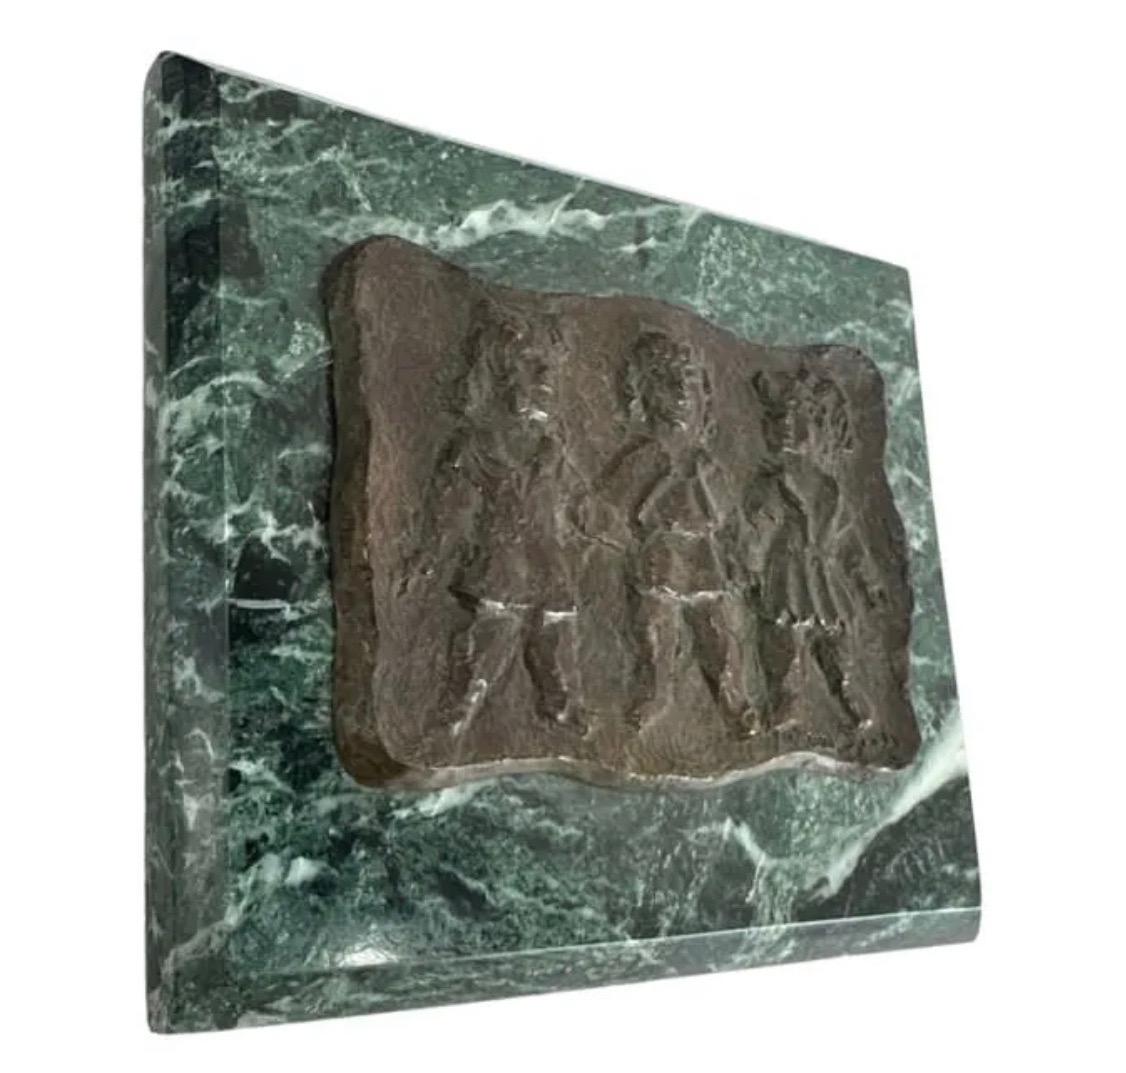 Chaim Gross
Three little girls, three Graces. 1981.
Bronze sculptural relief plaque mounted to verdigris marble. 
signed and dated on marble 
Marble approx 7.5